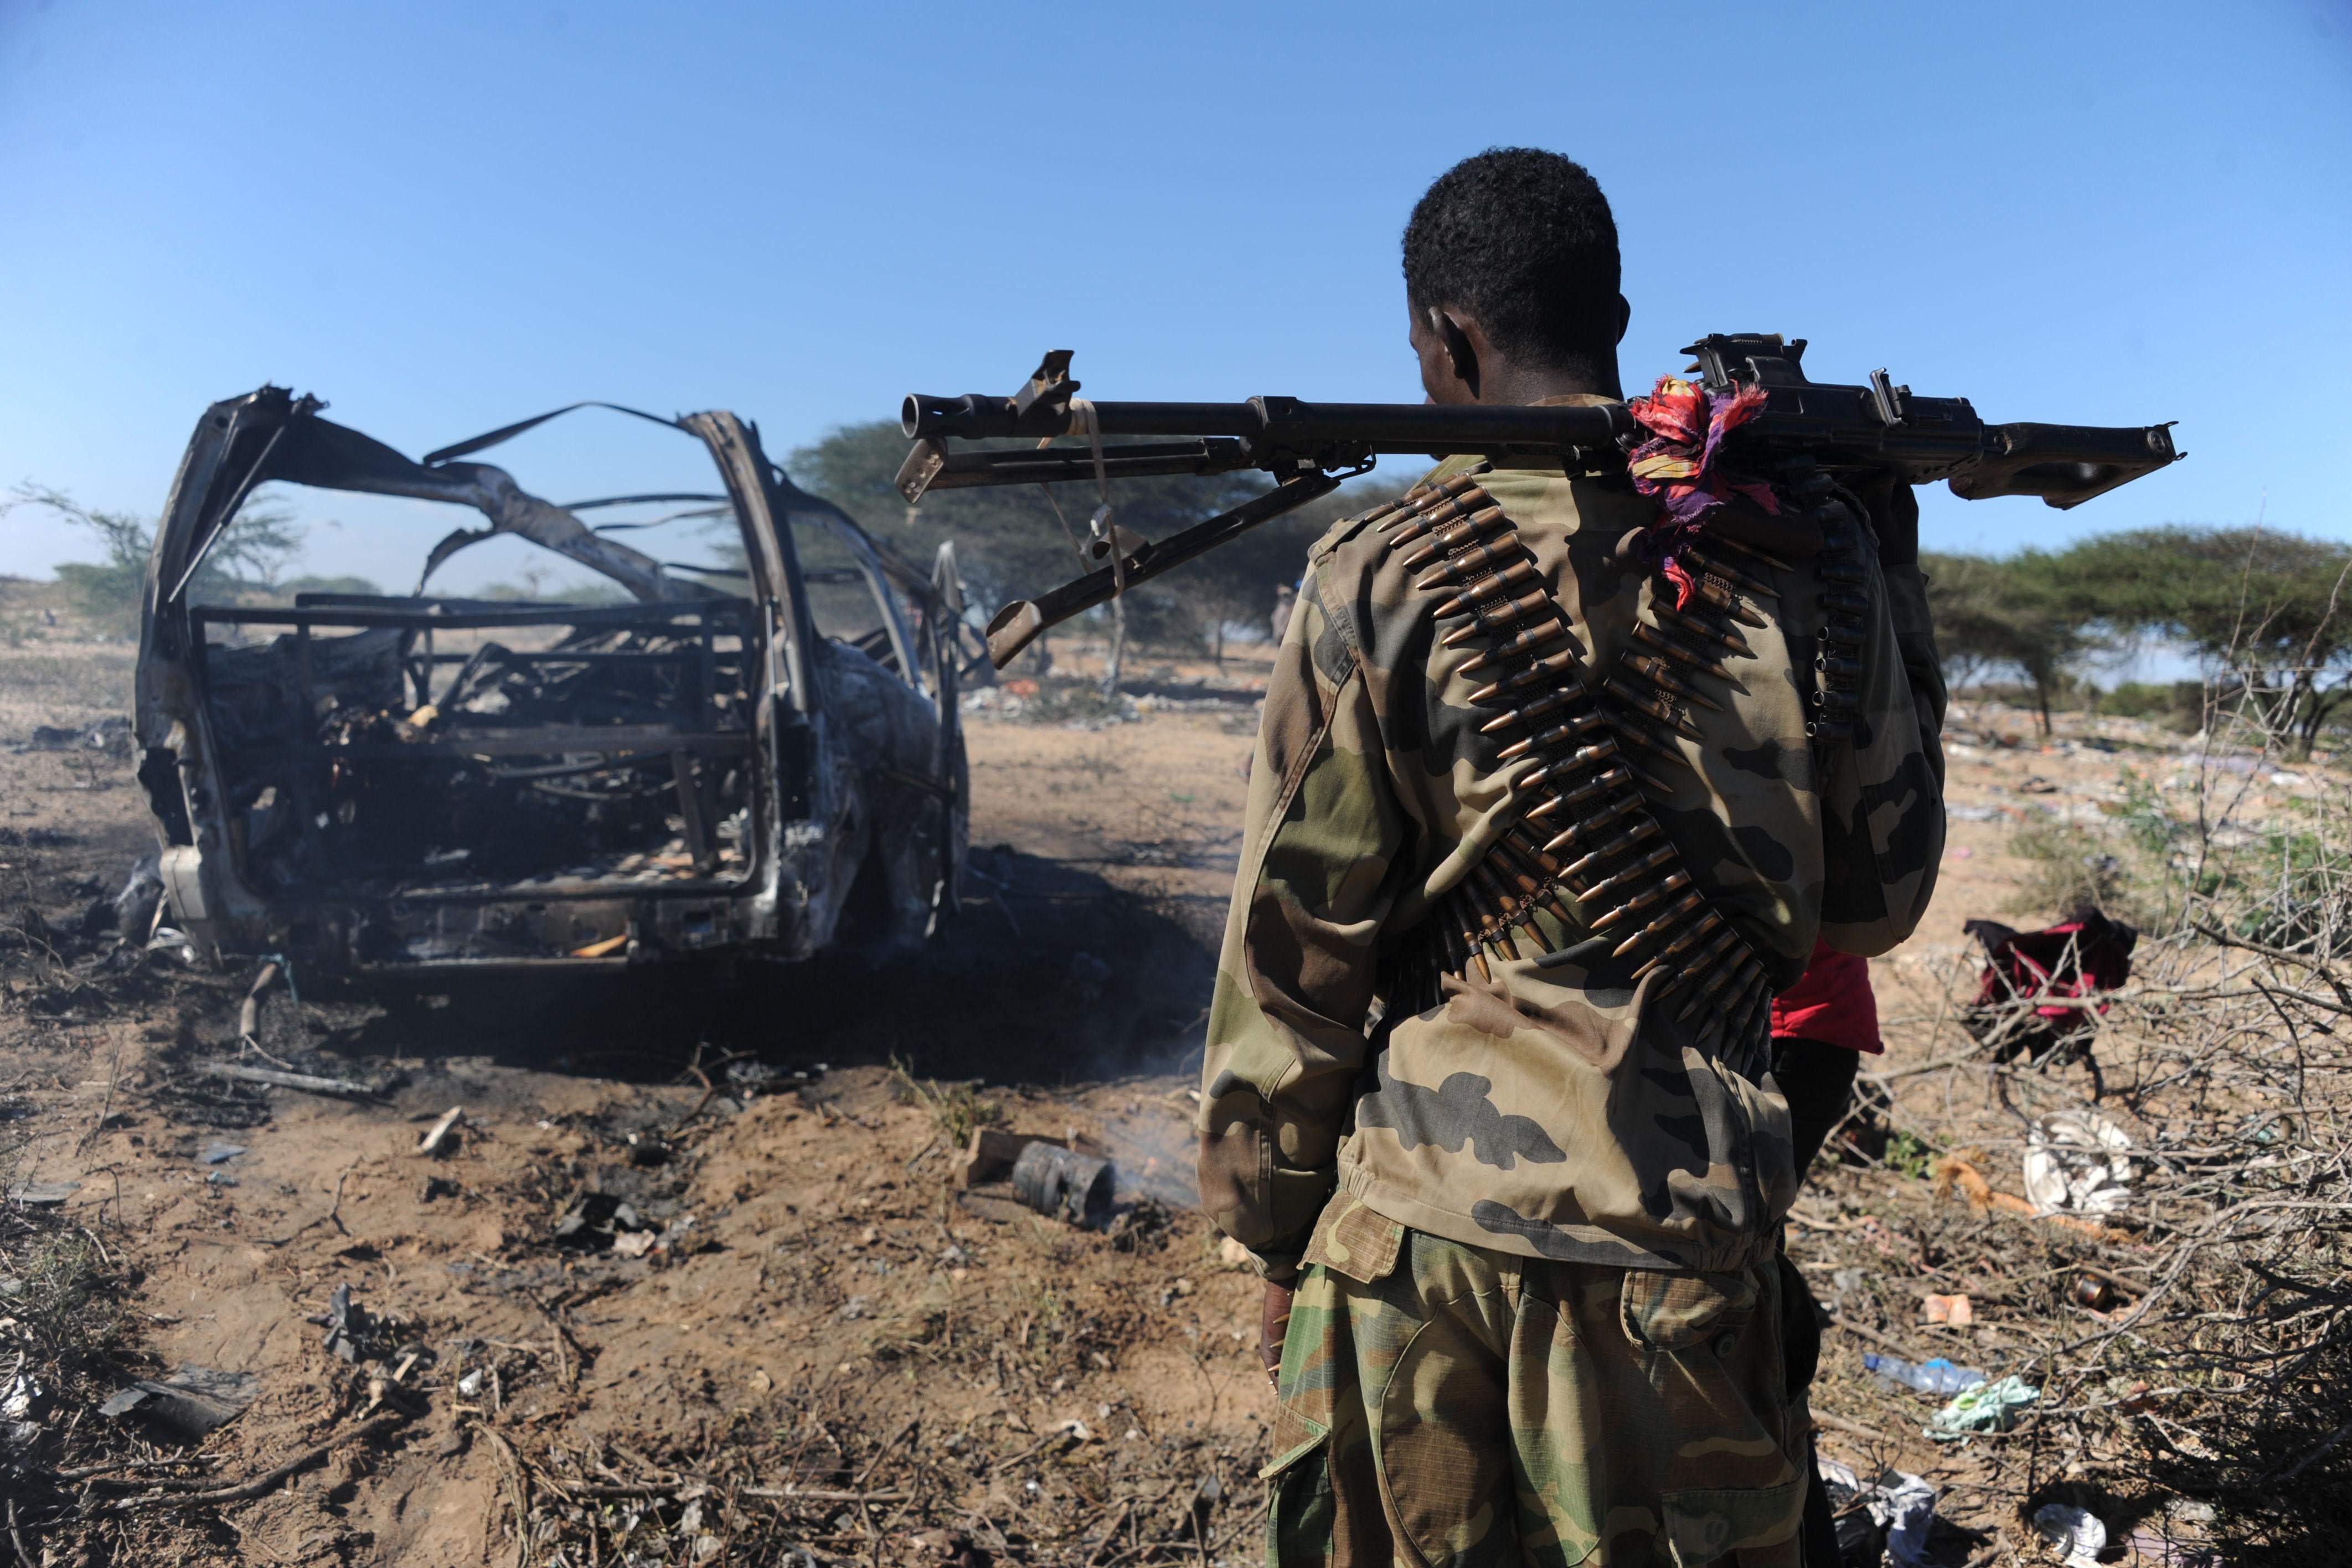 A soldiers checks the area where a suicide bomber from Somalia's Shebab insurgents killed at least 12 people and wounded 27 others, on September 8, 2014, by ramming a vehicle packed with explosives into a convoy of African Union troops in Mogadishu. The attack, the latest in a string of killings, comes exactly one week after a US airstrike killed the chief of the Al-Qaeda-linked Shebab rebels, Ahmed Abdi Godane, prompting threats of retaliation from the extremists.    AFP PHOTO MOHAMED ABDIWAHAB        (Photo credit should read Mohamed Abdiwahab/AFP via Getty Images)